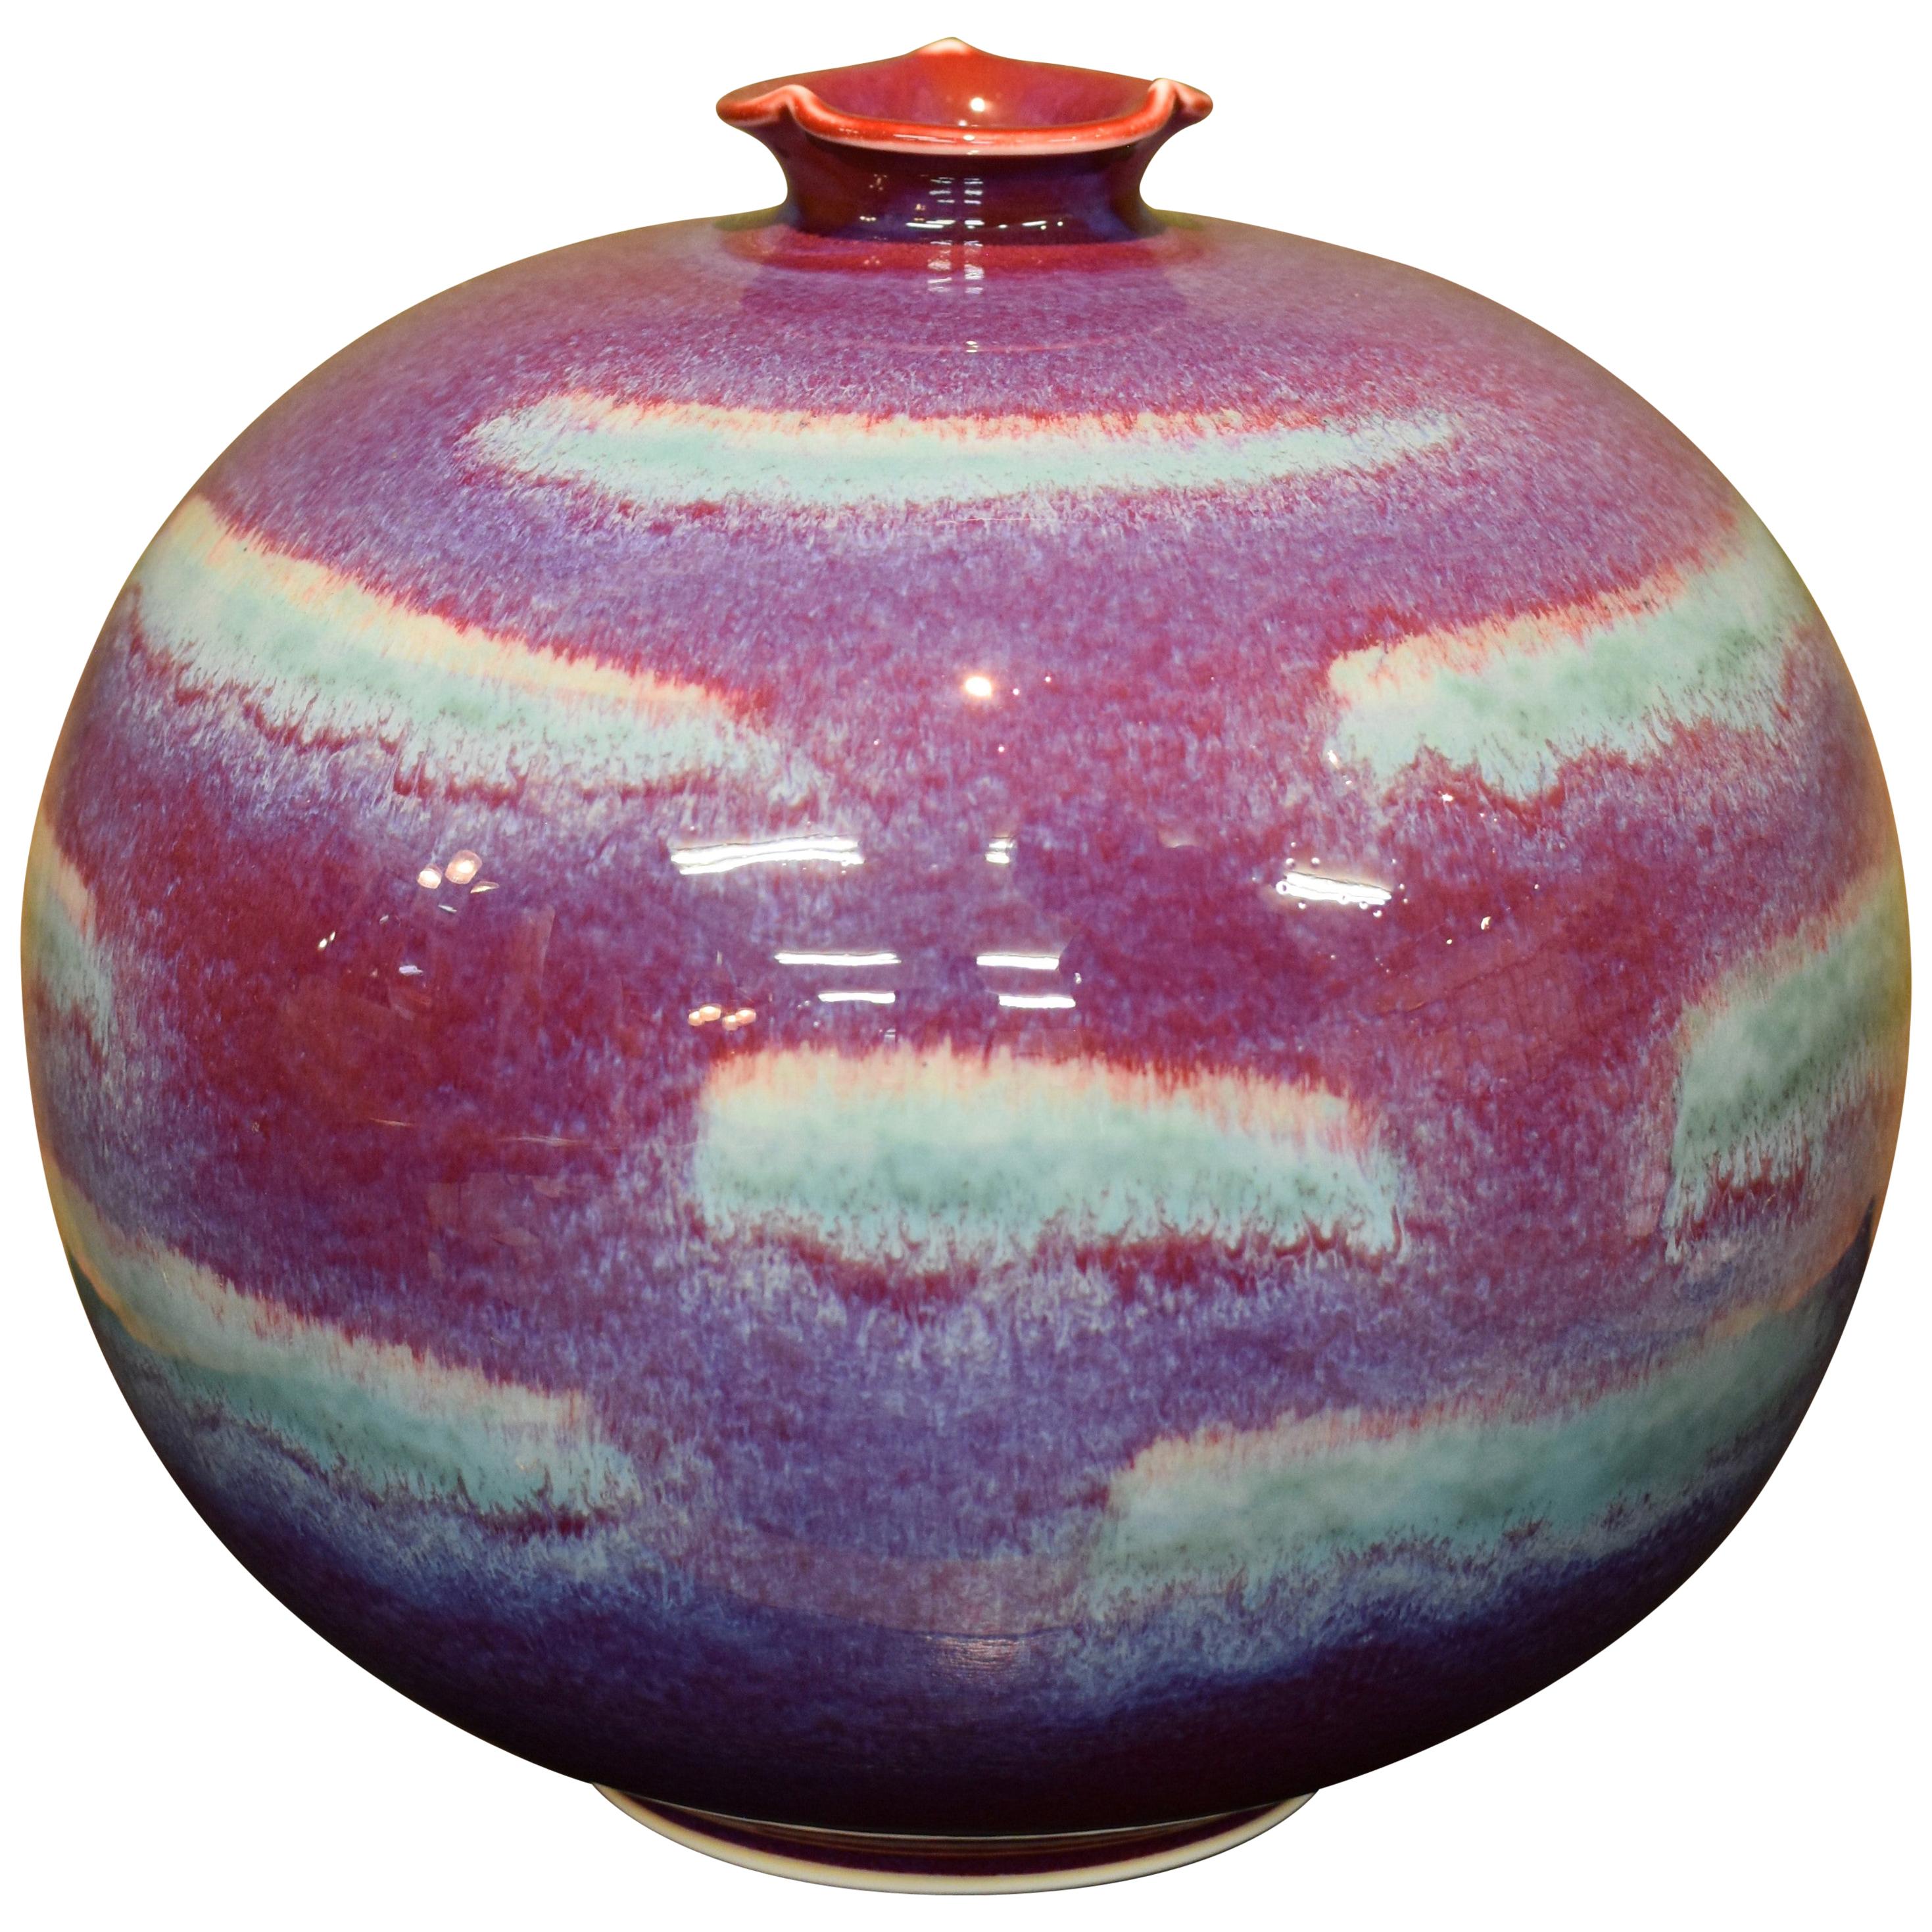 Contemporary Red Purple Porcelain Vase by Japanese Master Artists